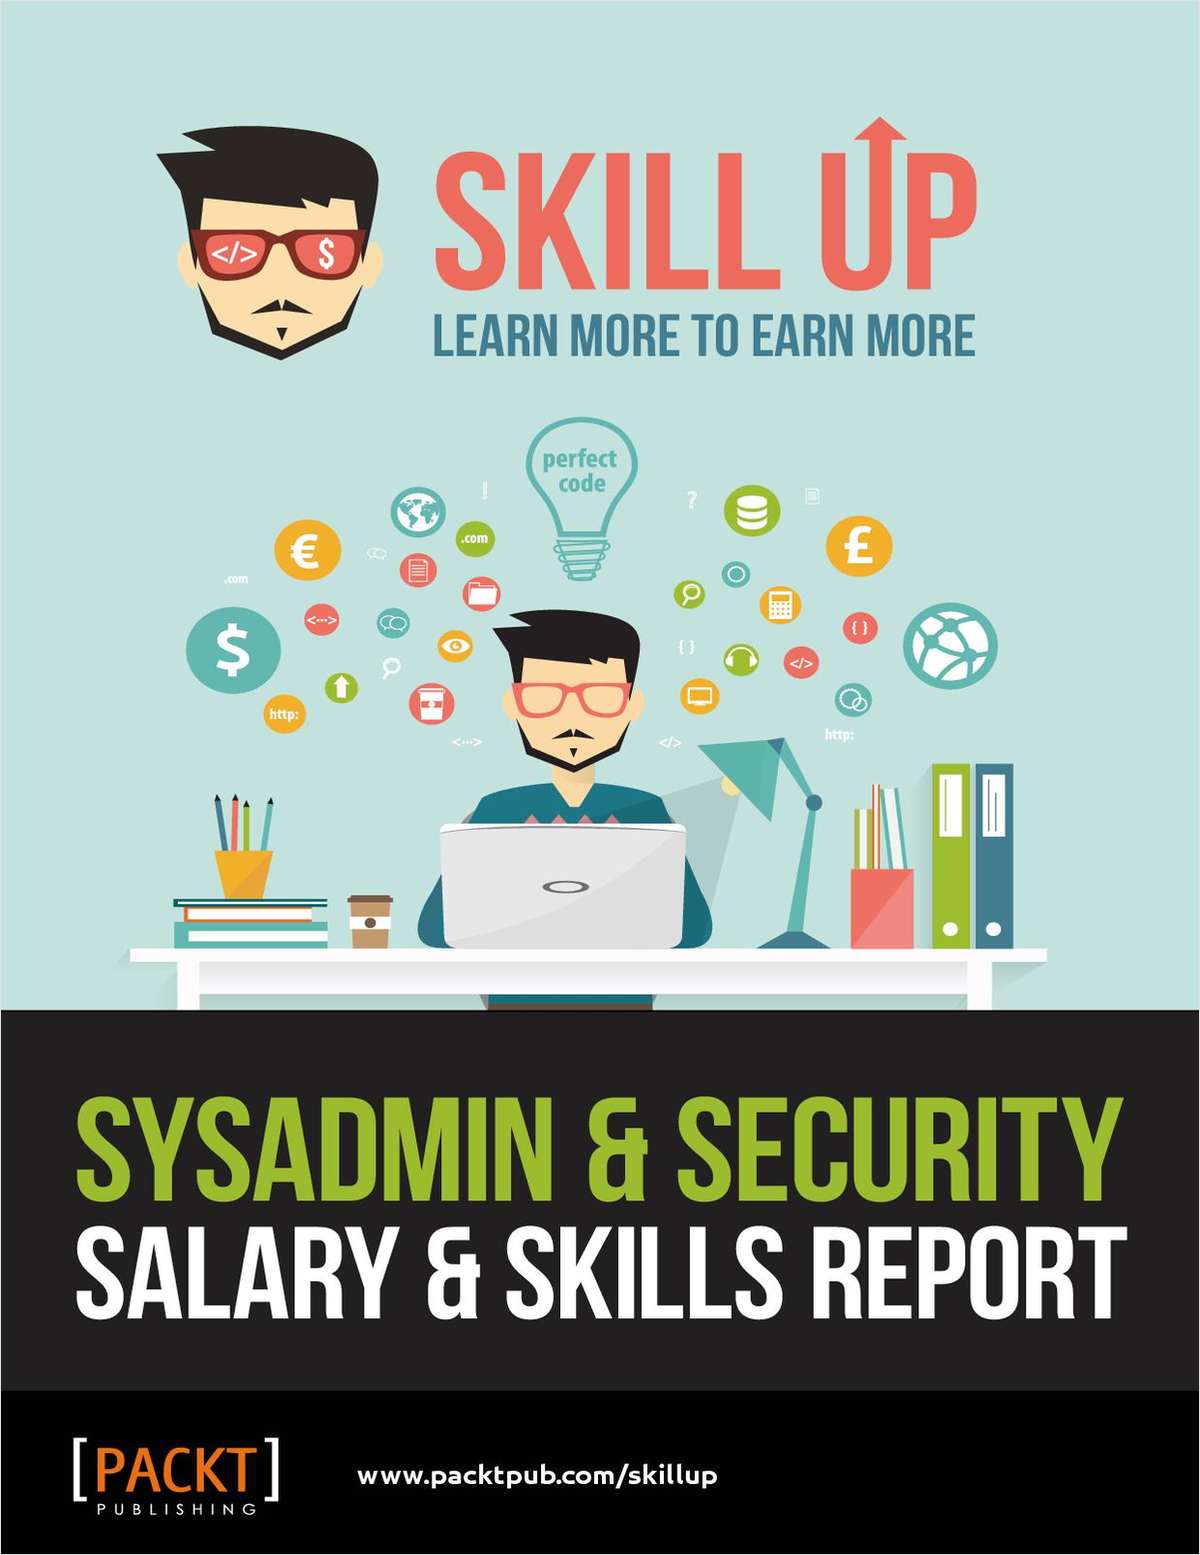 System Administration & Security - Salary & Skills Report